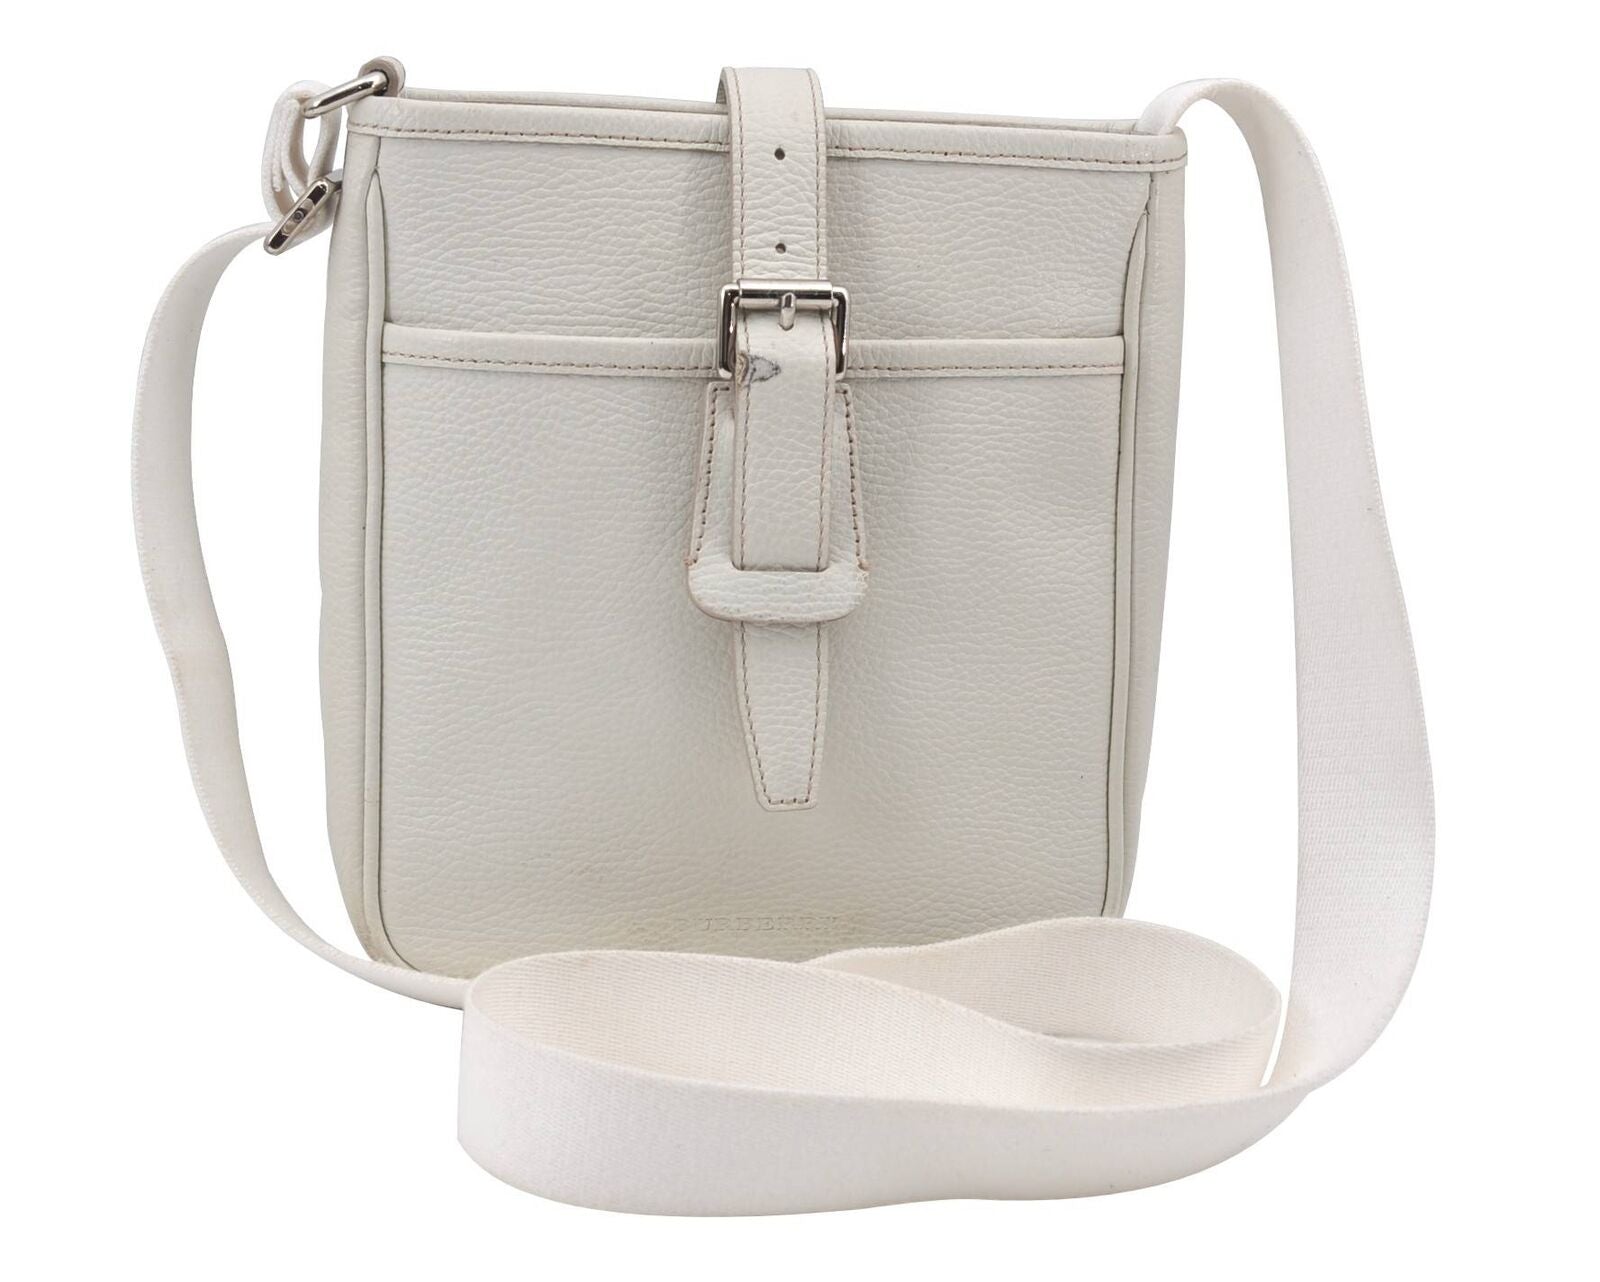 Authentic BURBERRY Vintage Leather Shoulder Cross Body Bag White H3598